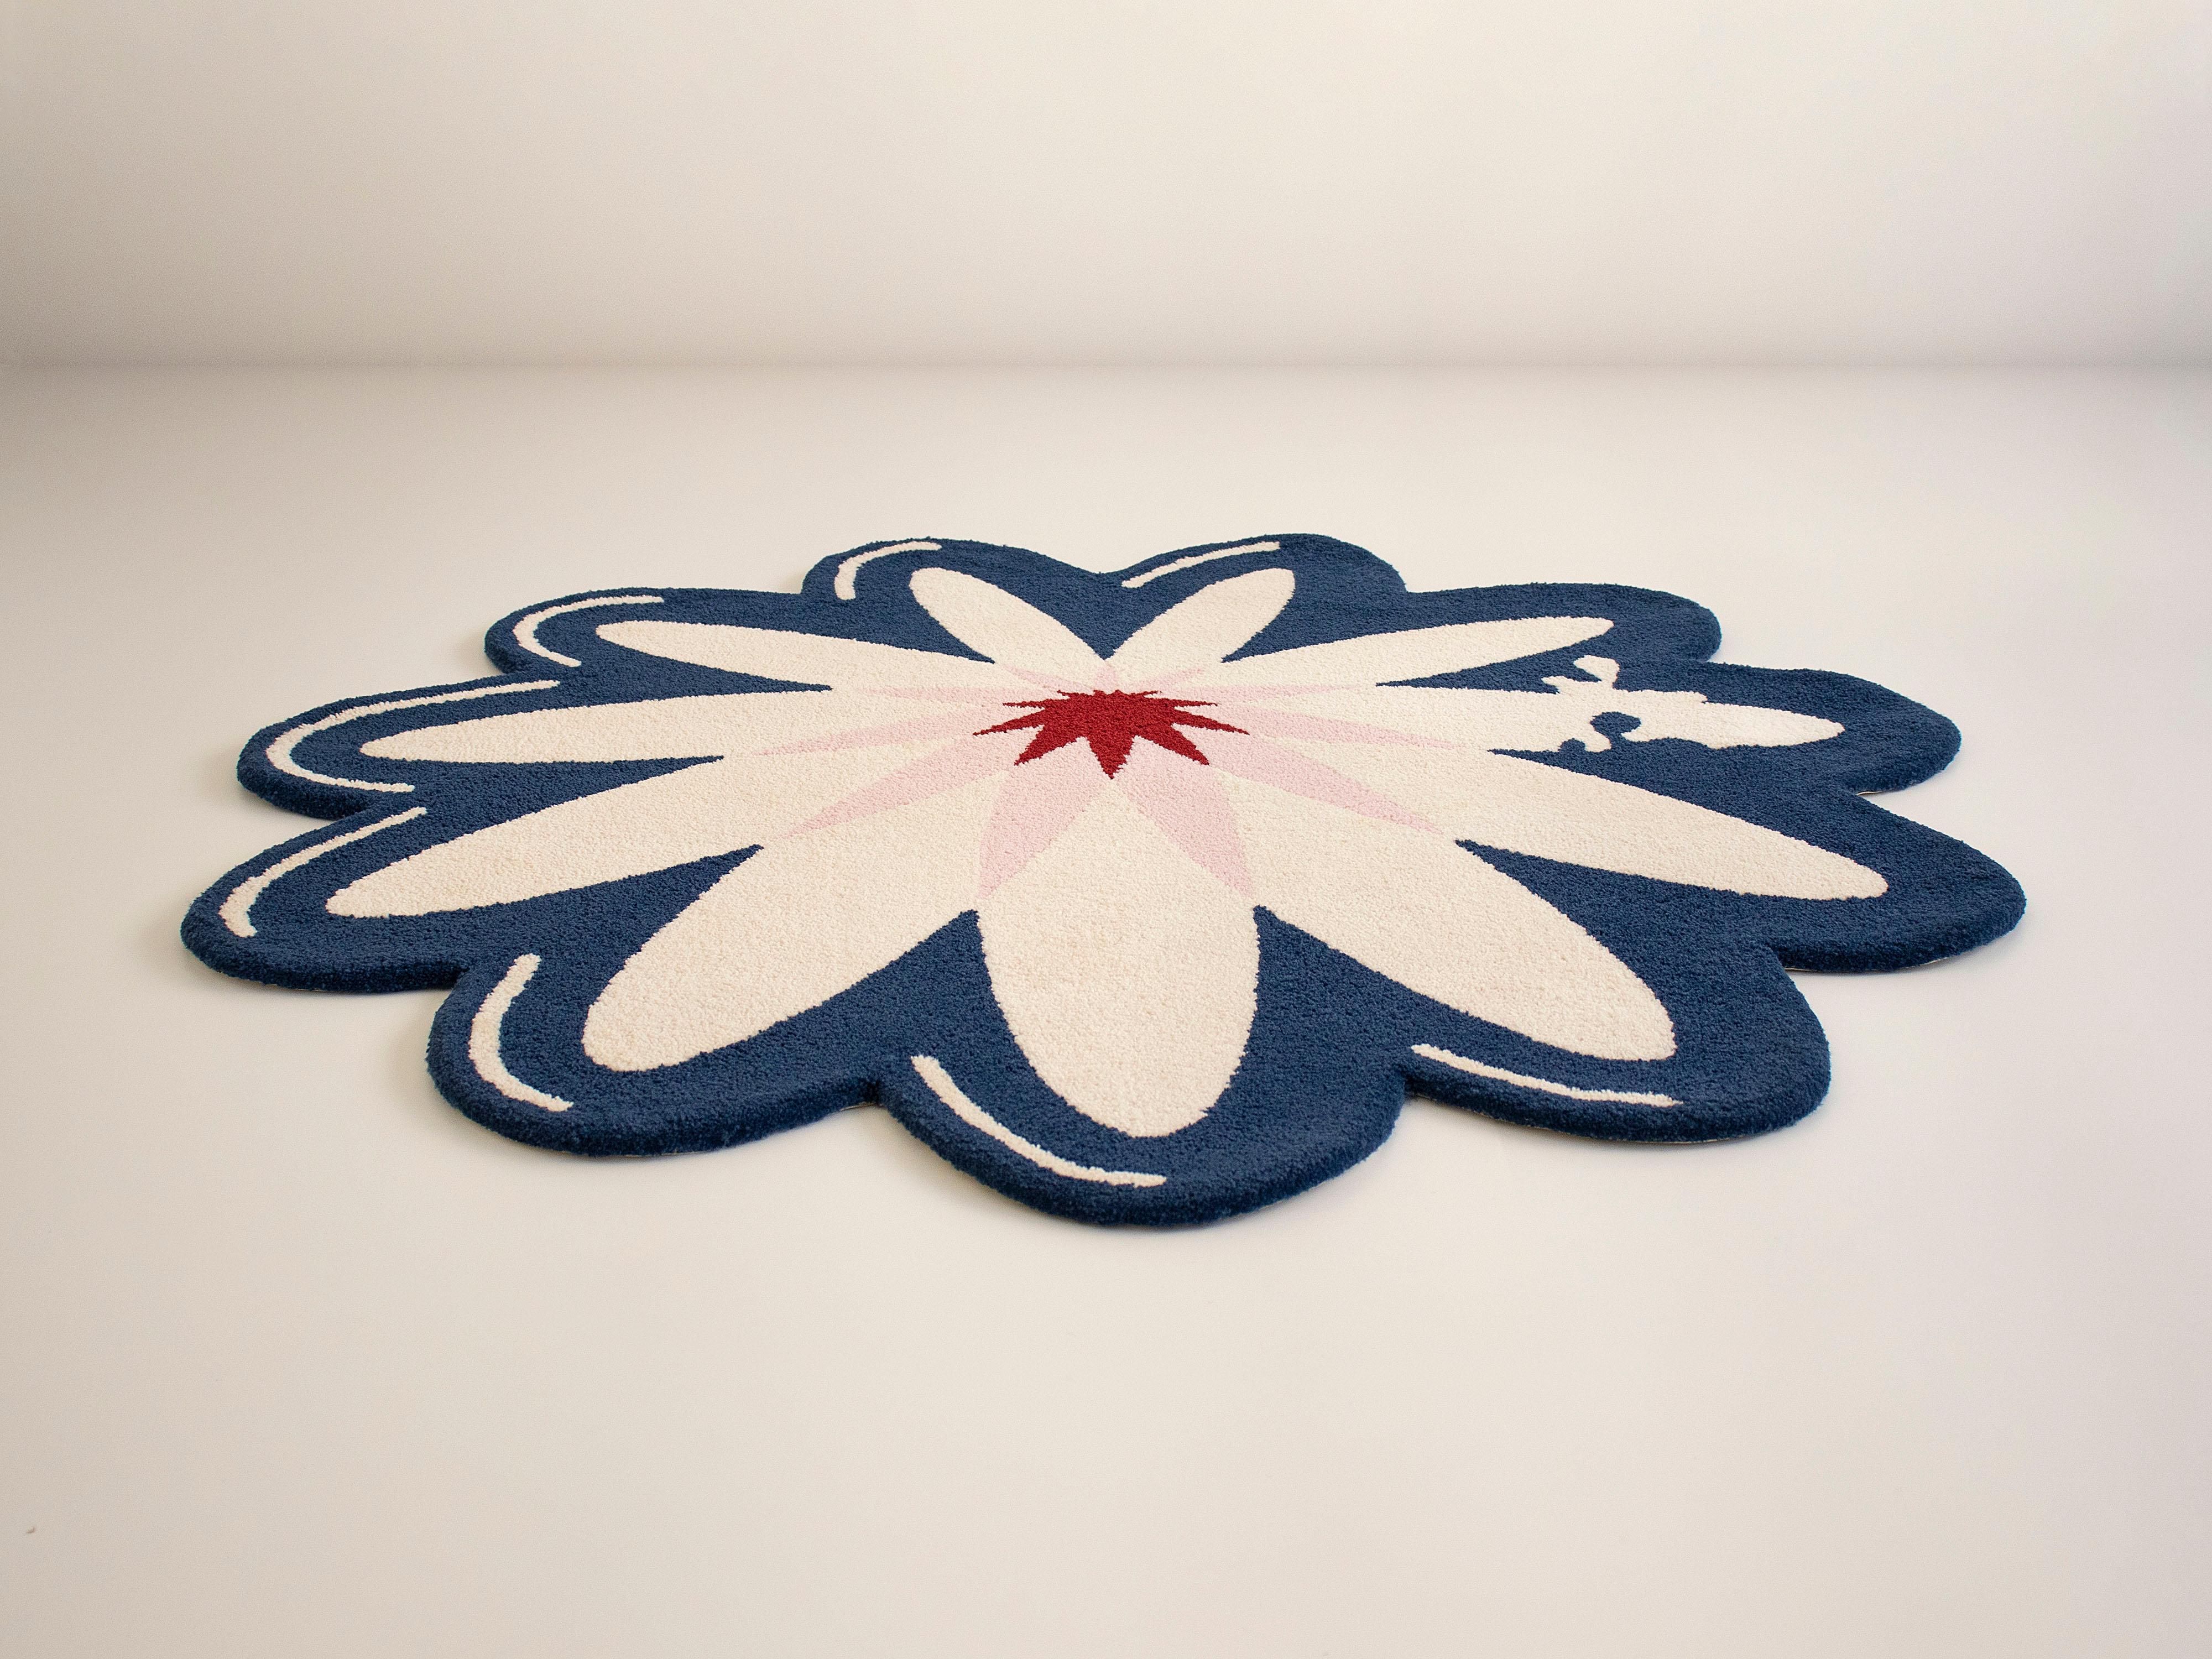 Contemporary Round Blue, White & Red Flower Rug from Graffiti Collection by Paulo Kobylka For Sale